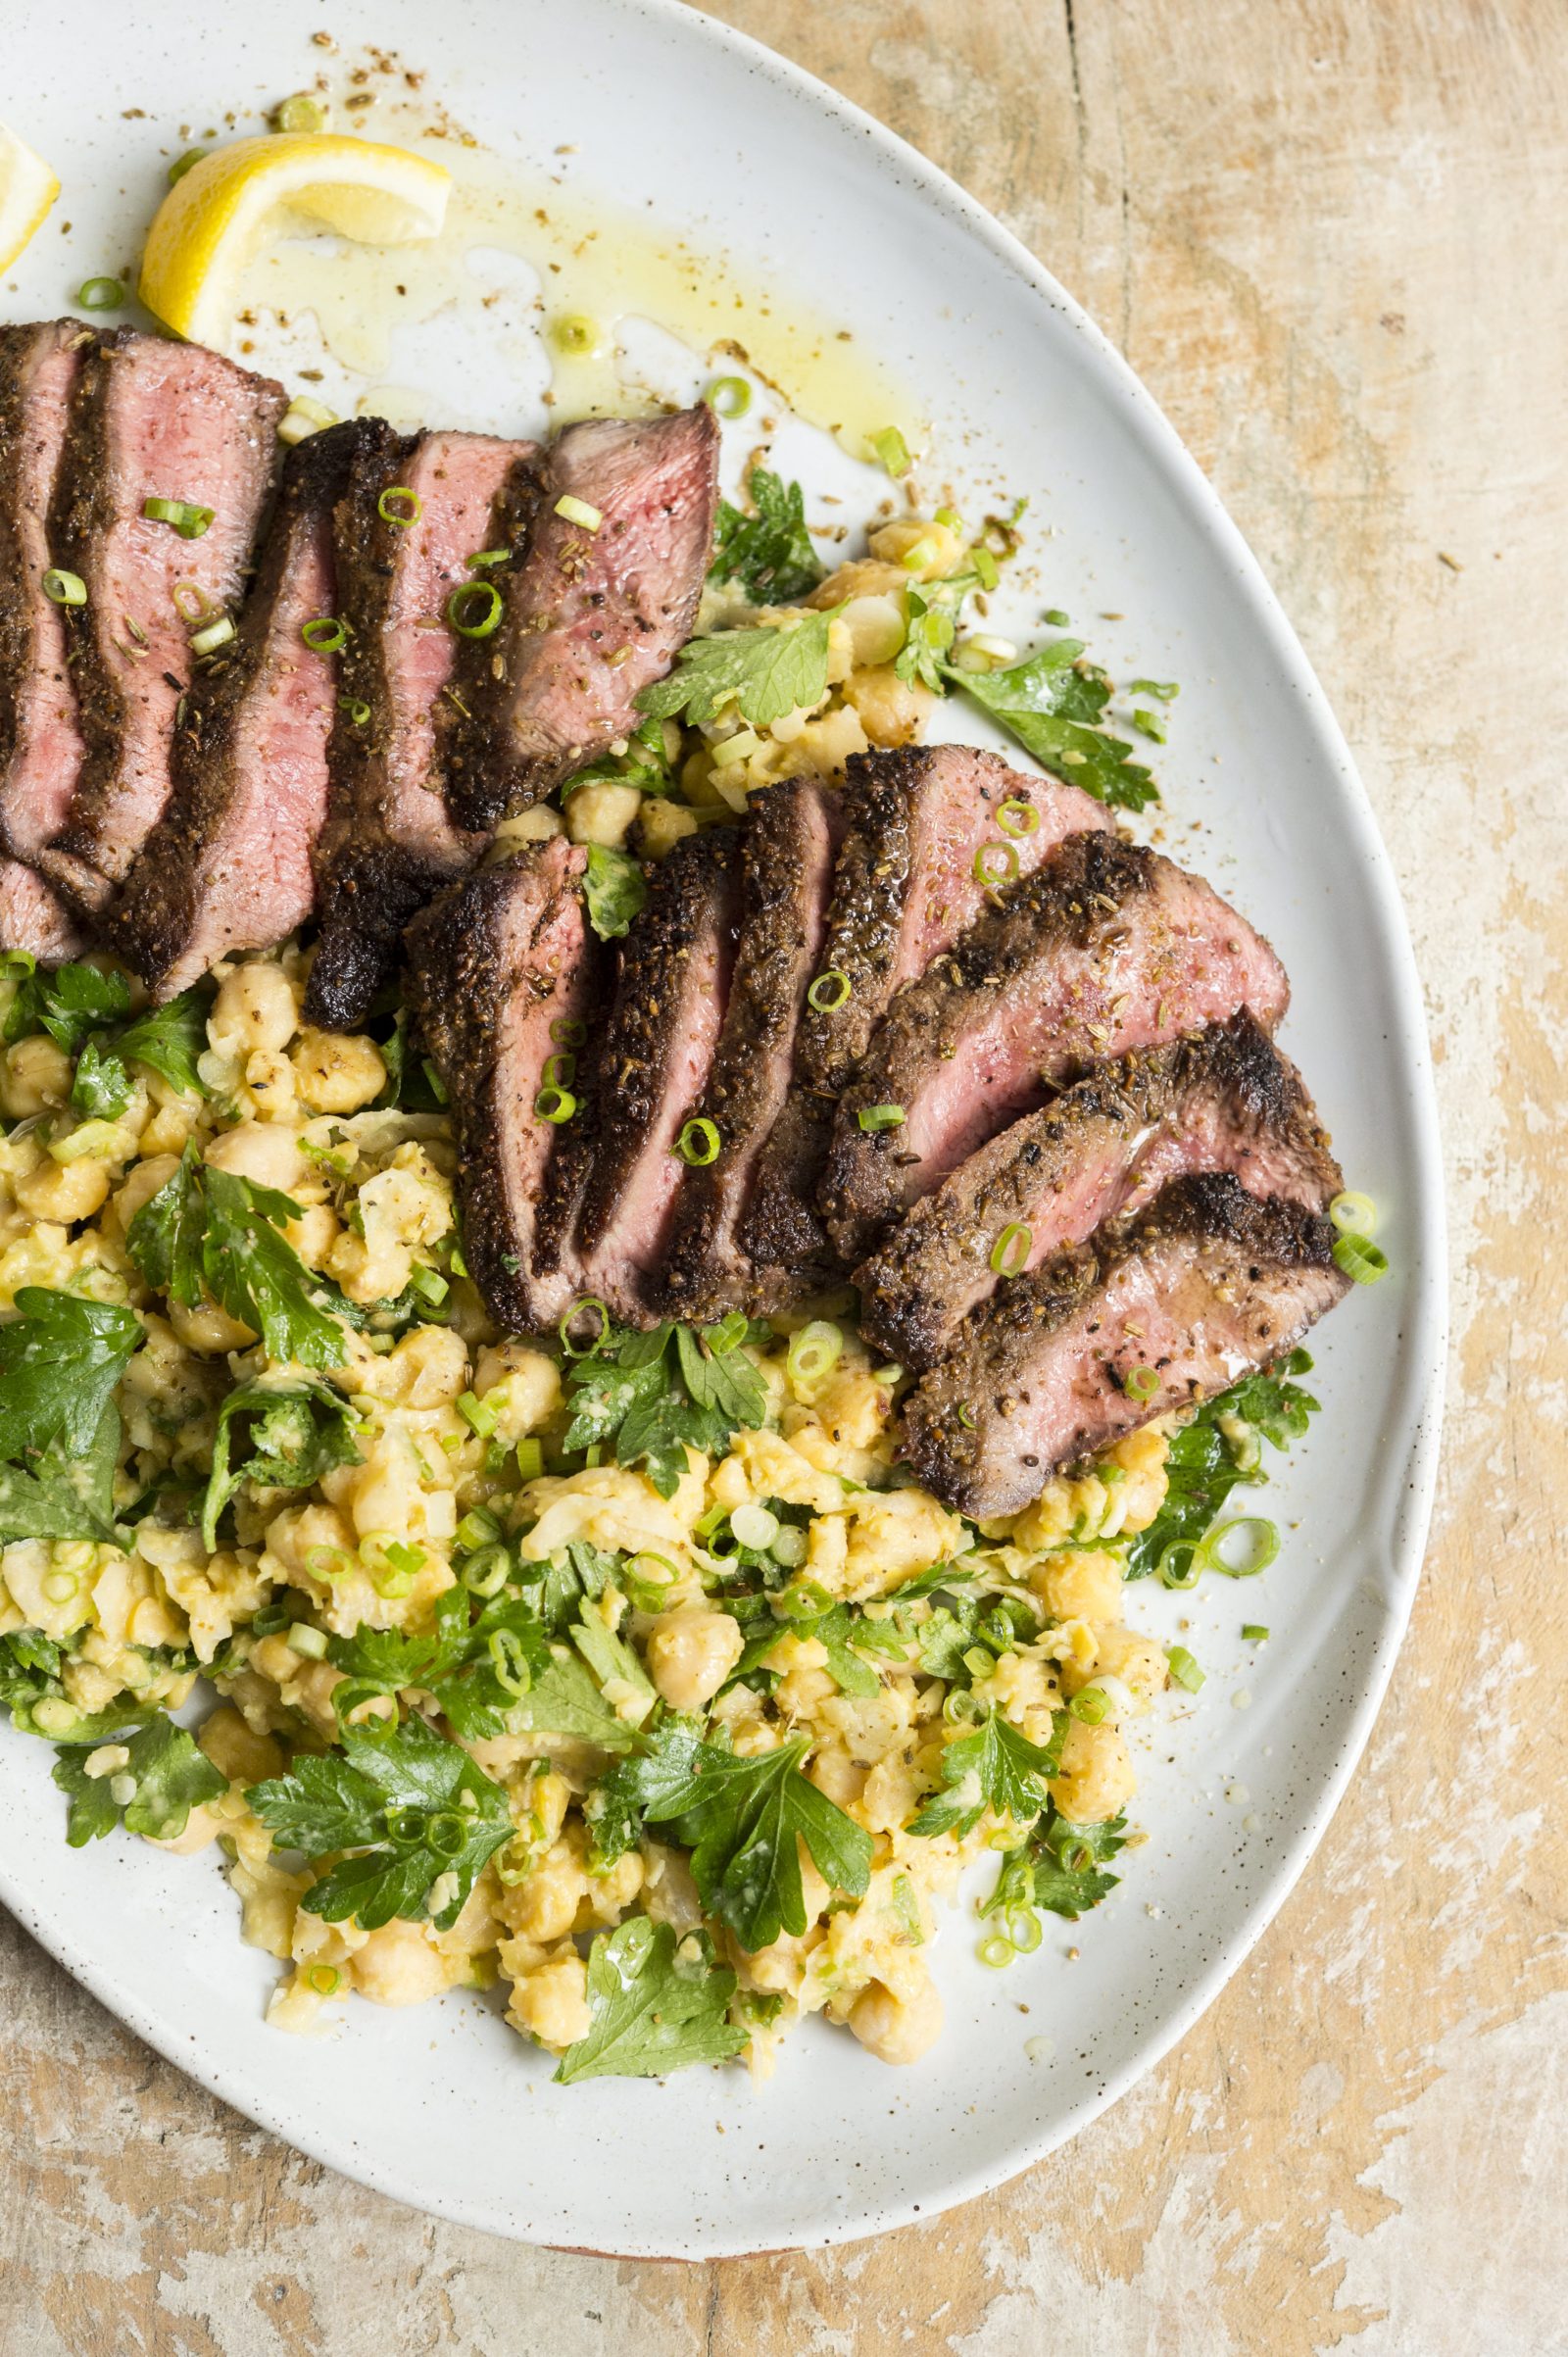 Spice-Crusted Steak with Mashed Chickpeas